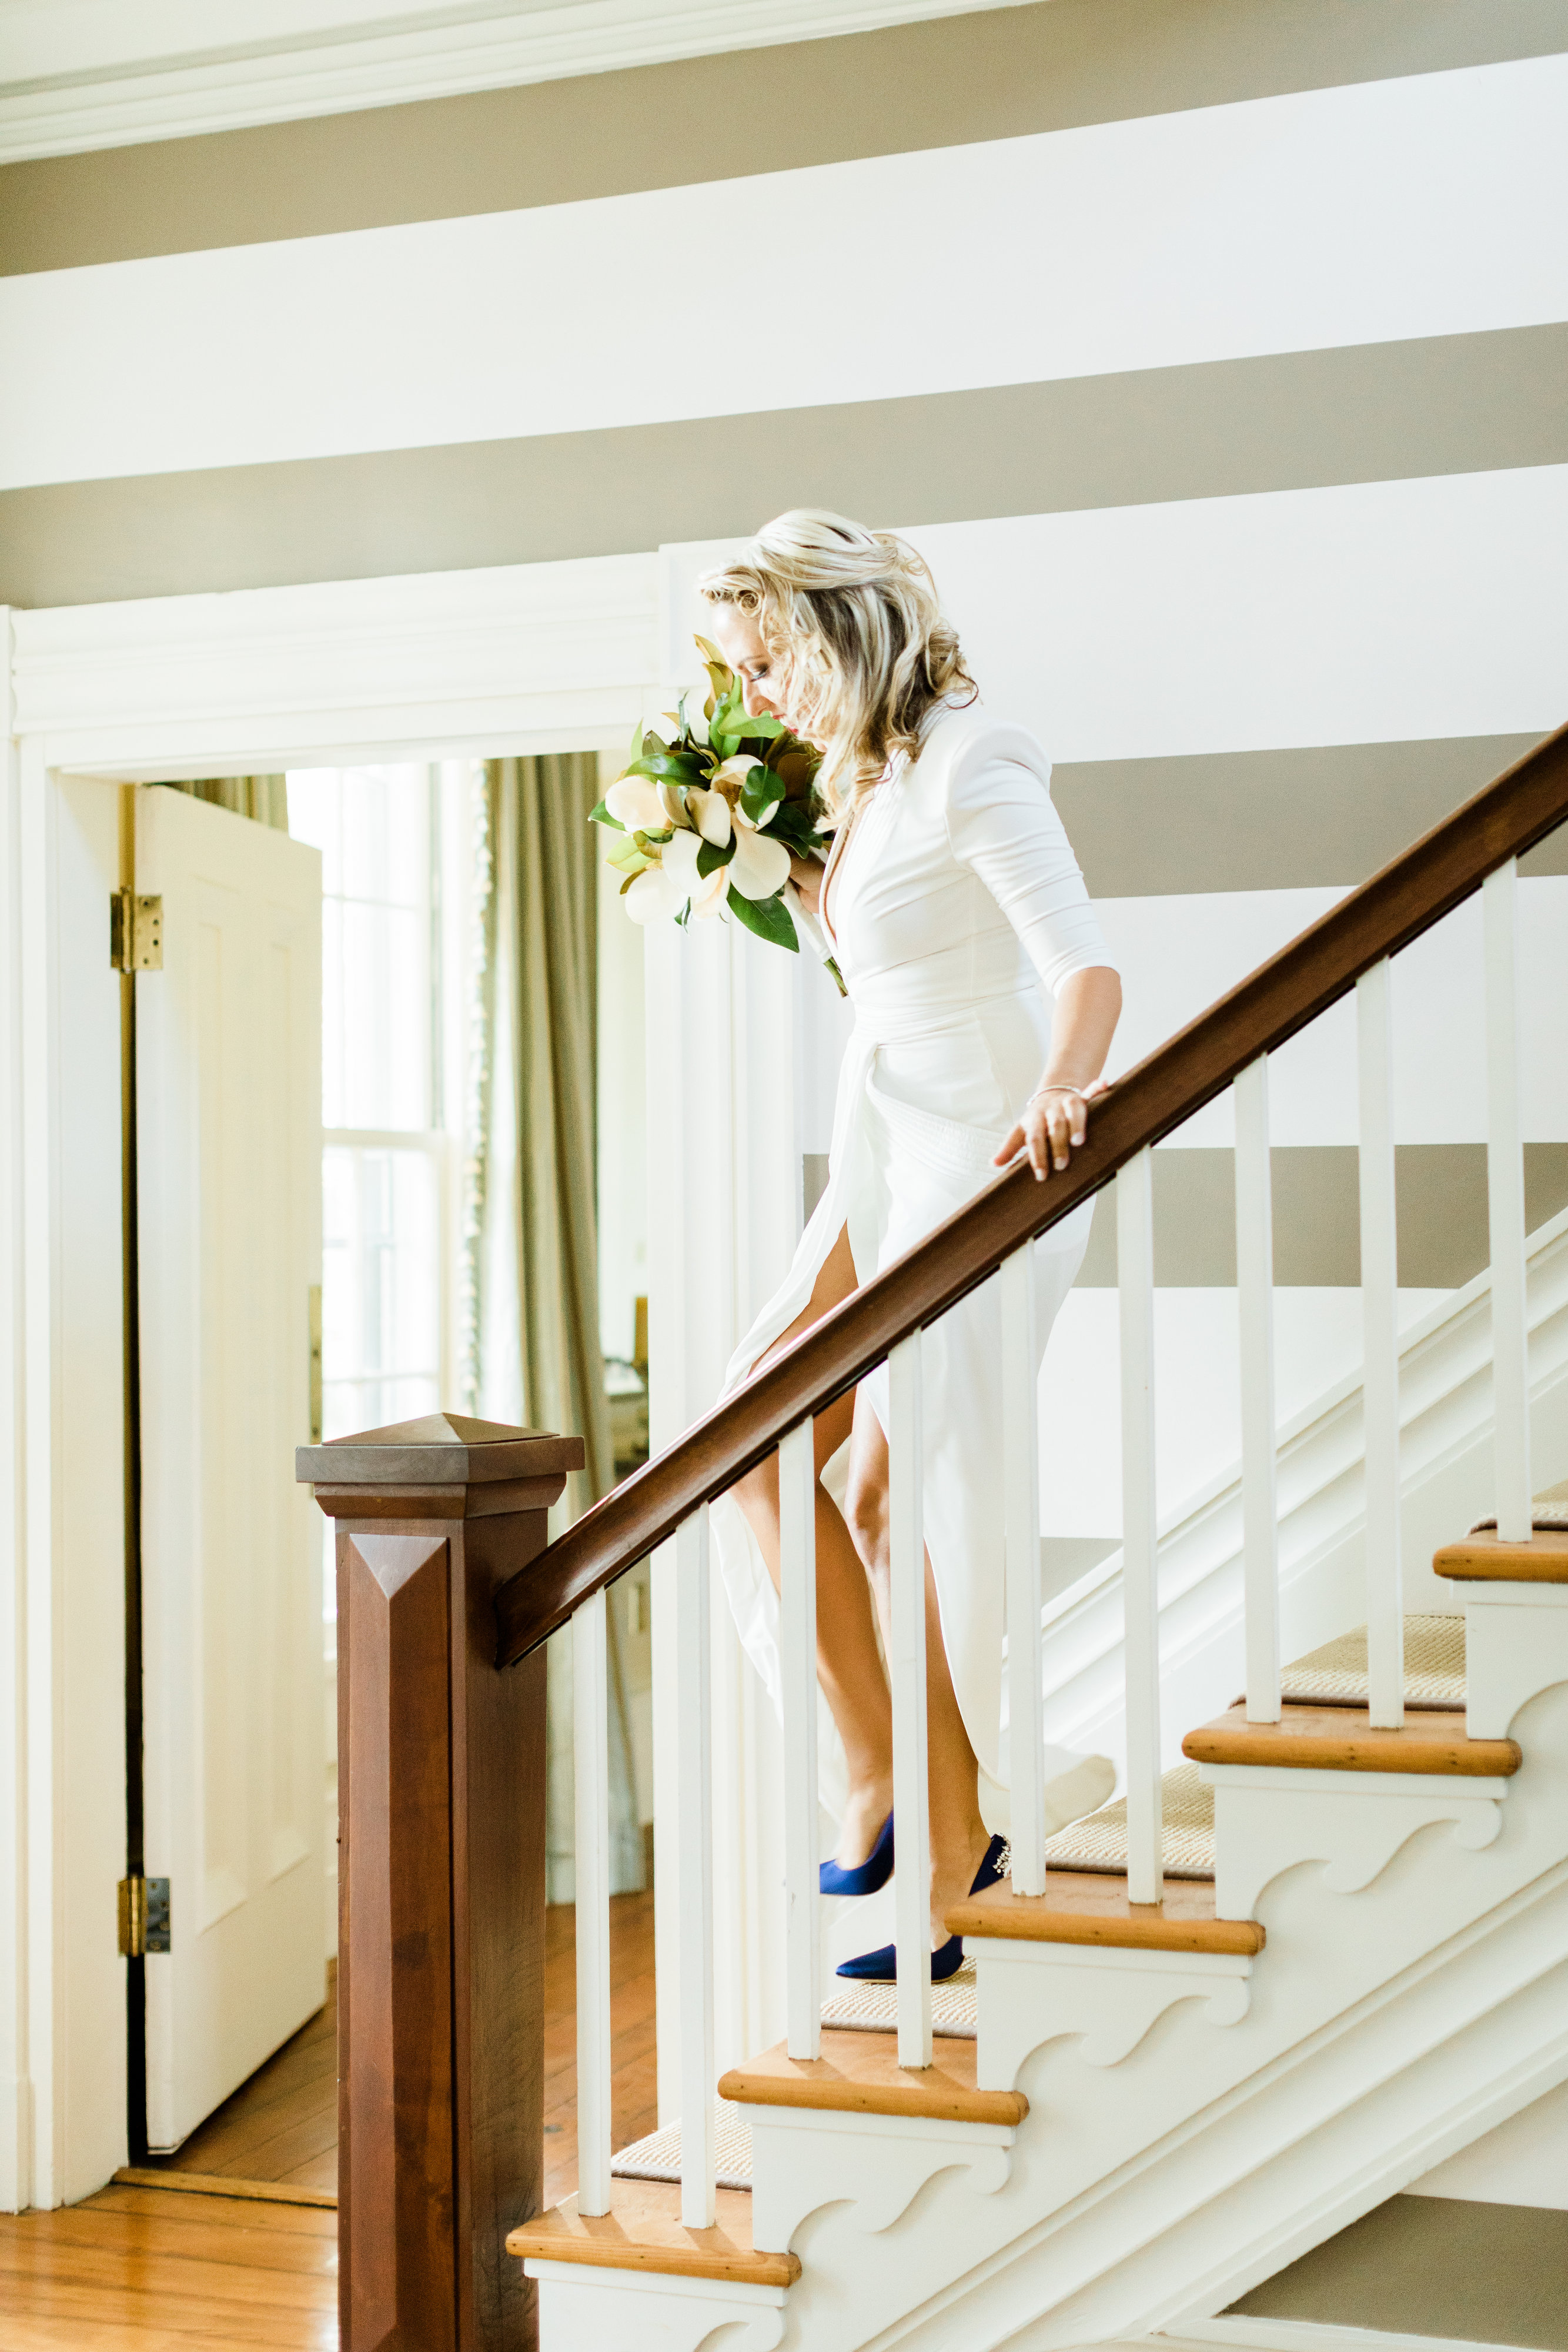 View More: http://samanthamoorephotography.pass.us/nicolearthurwed